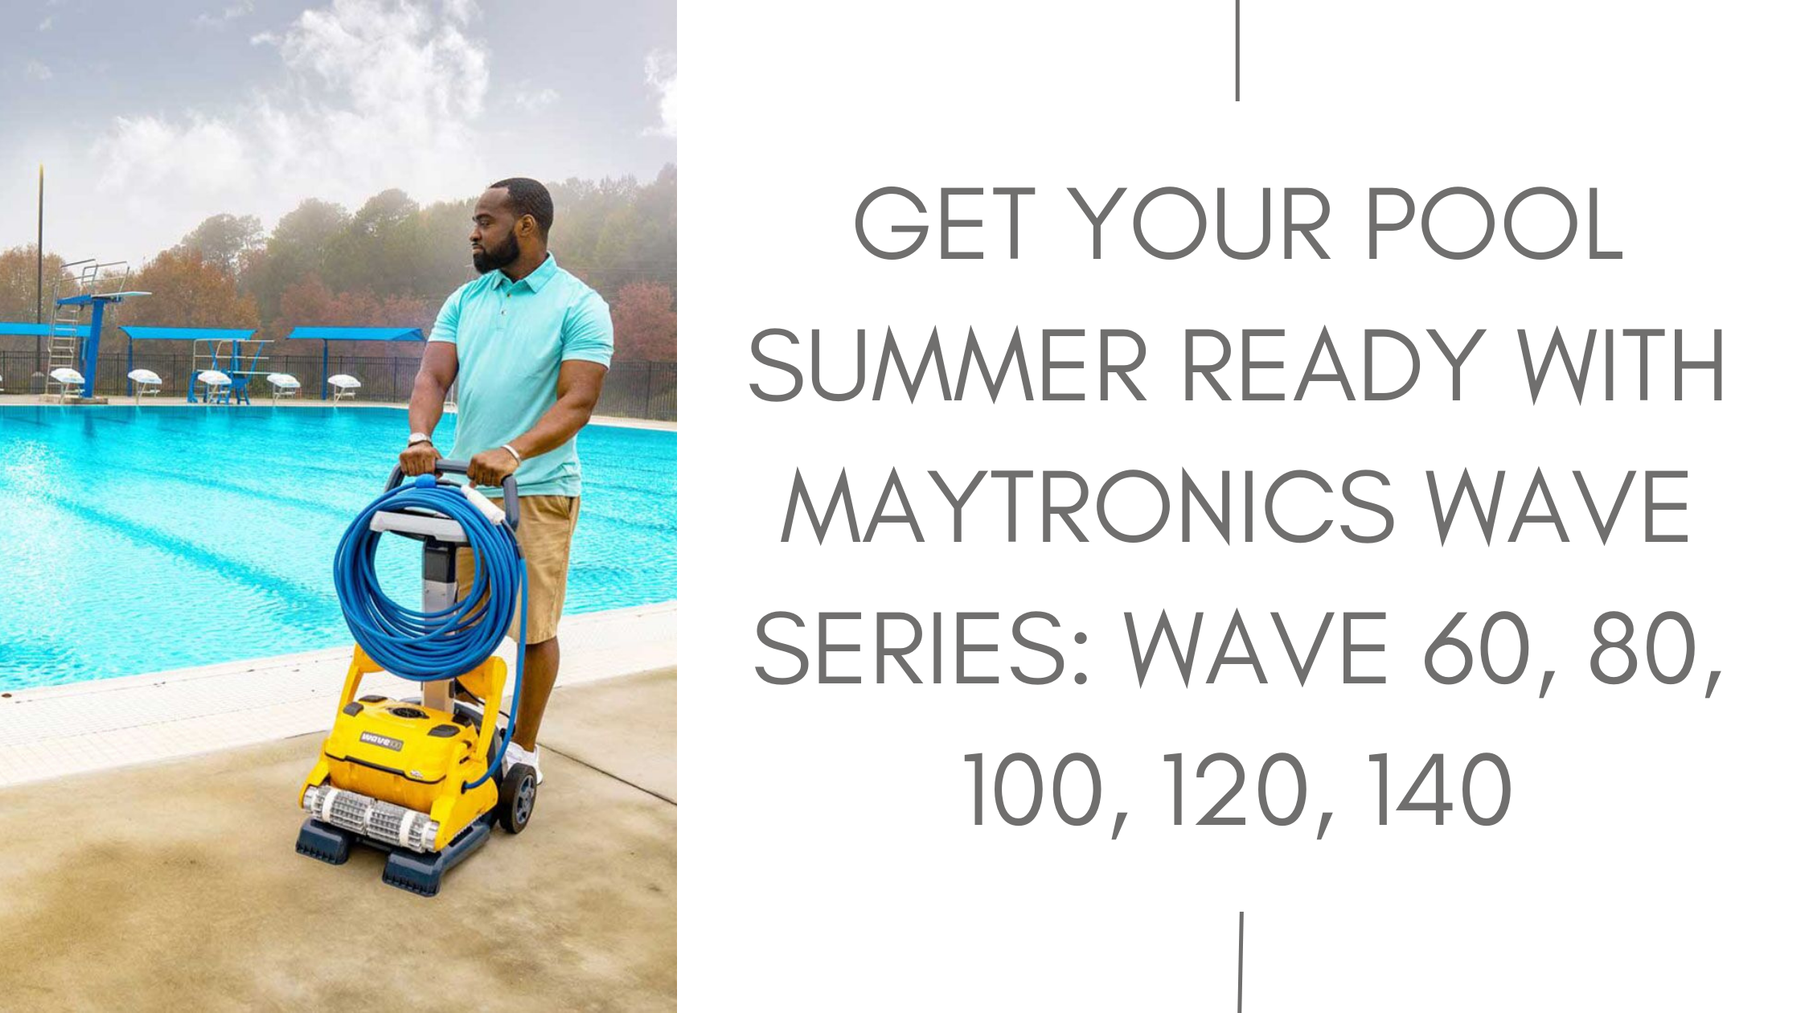 Get Your Pool Summer Ready with Maytronics Wave Series: Wave 60, 80, 100, 120, 140